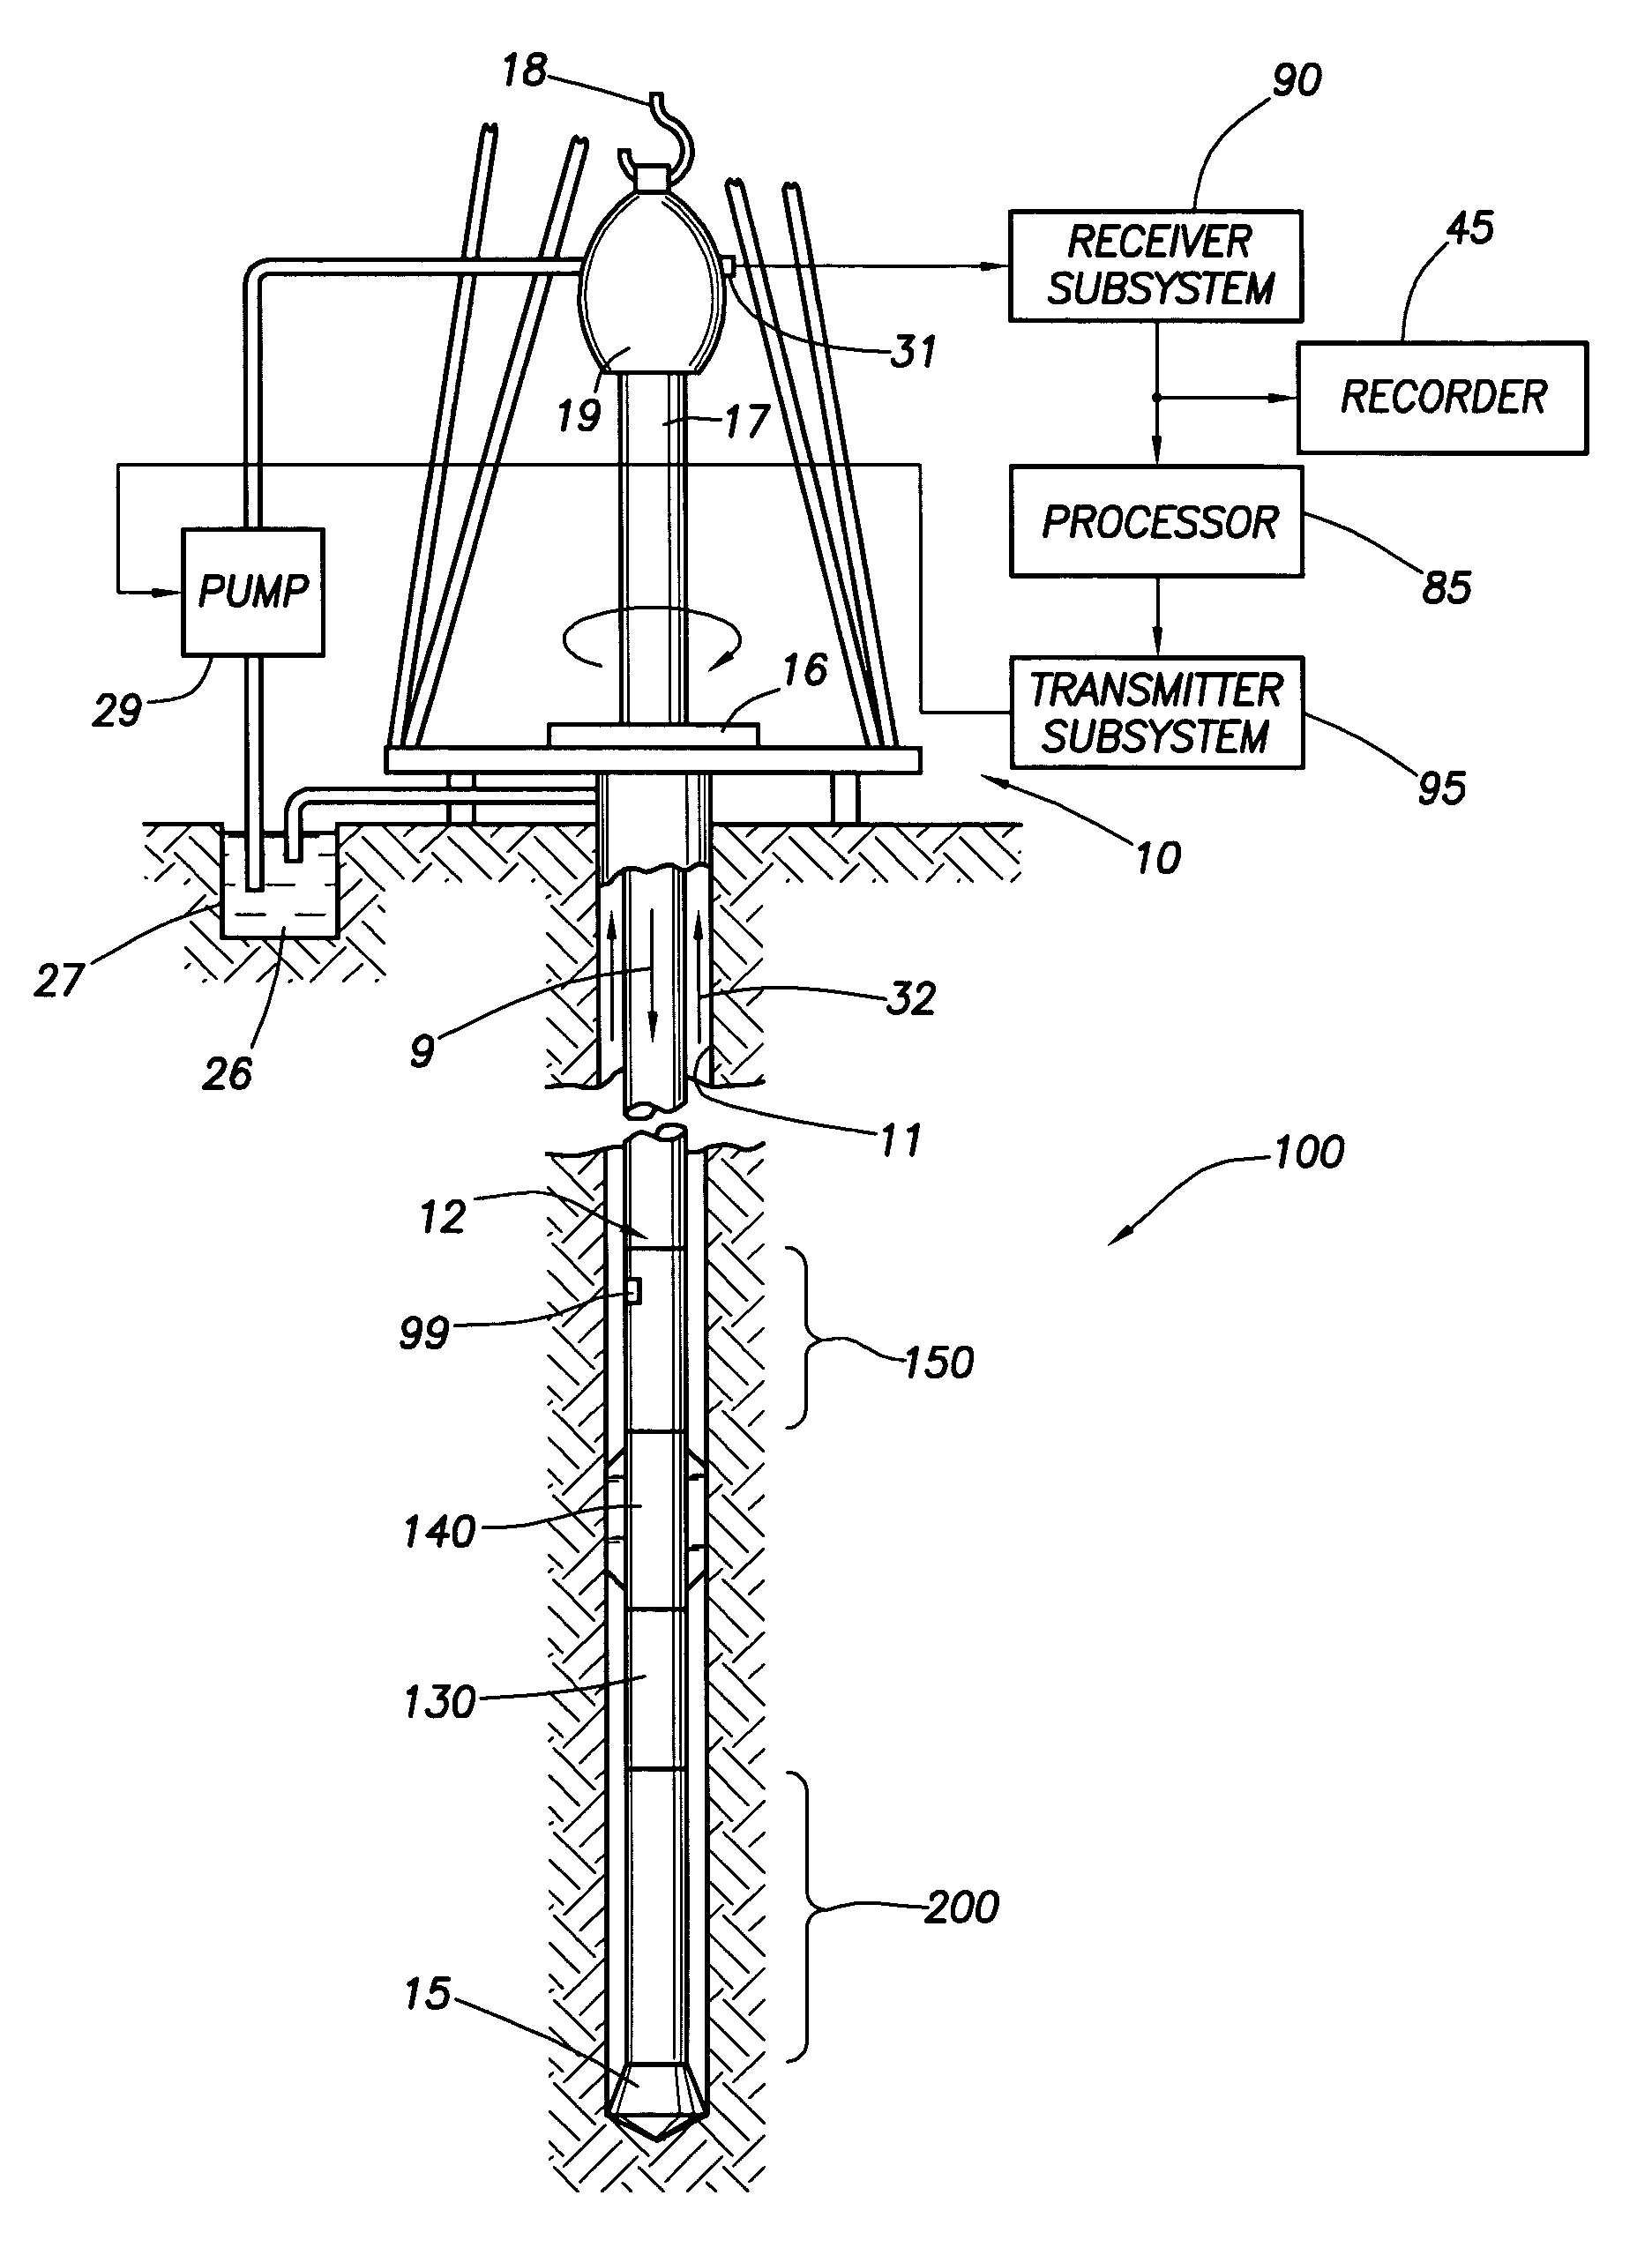 Downhole measurement of formation characteristics while drilling